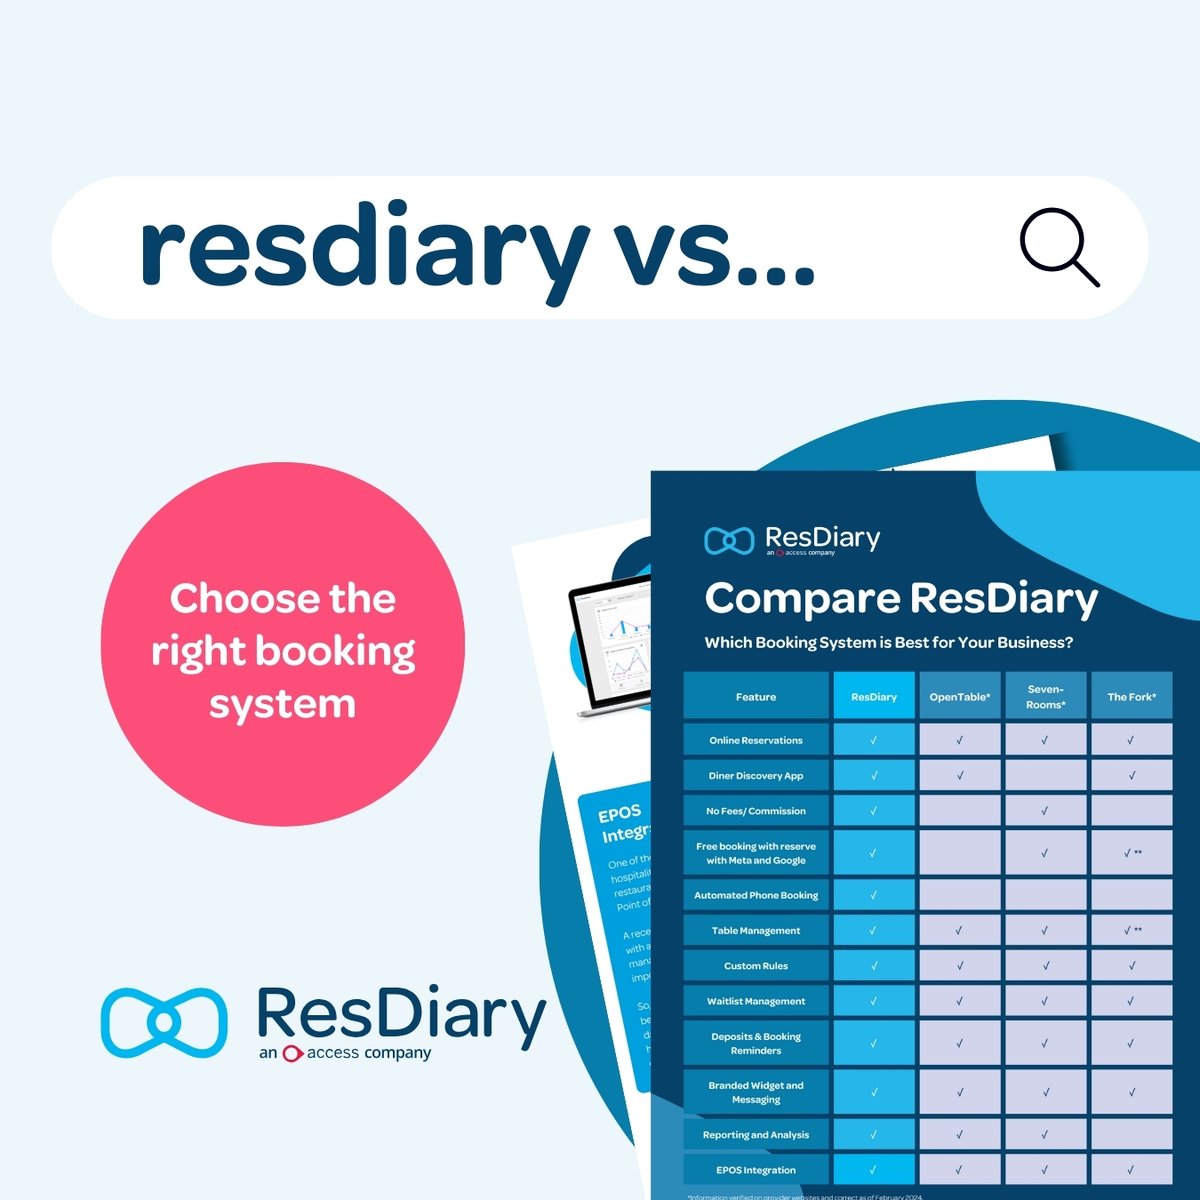 Choosing an online reservation system can be pretty overwhelming. To help you in your research, we've broken down the most important differences between ResDiary and alternative providers. eu1.hubs.ly/H08rPqN0 #HospitalityTechnology #CommissionFree